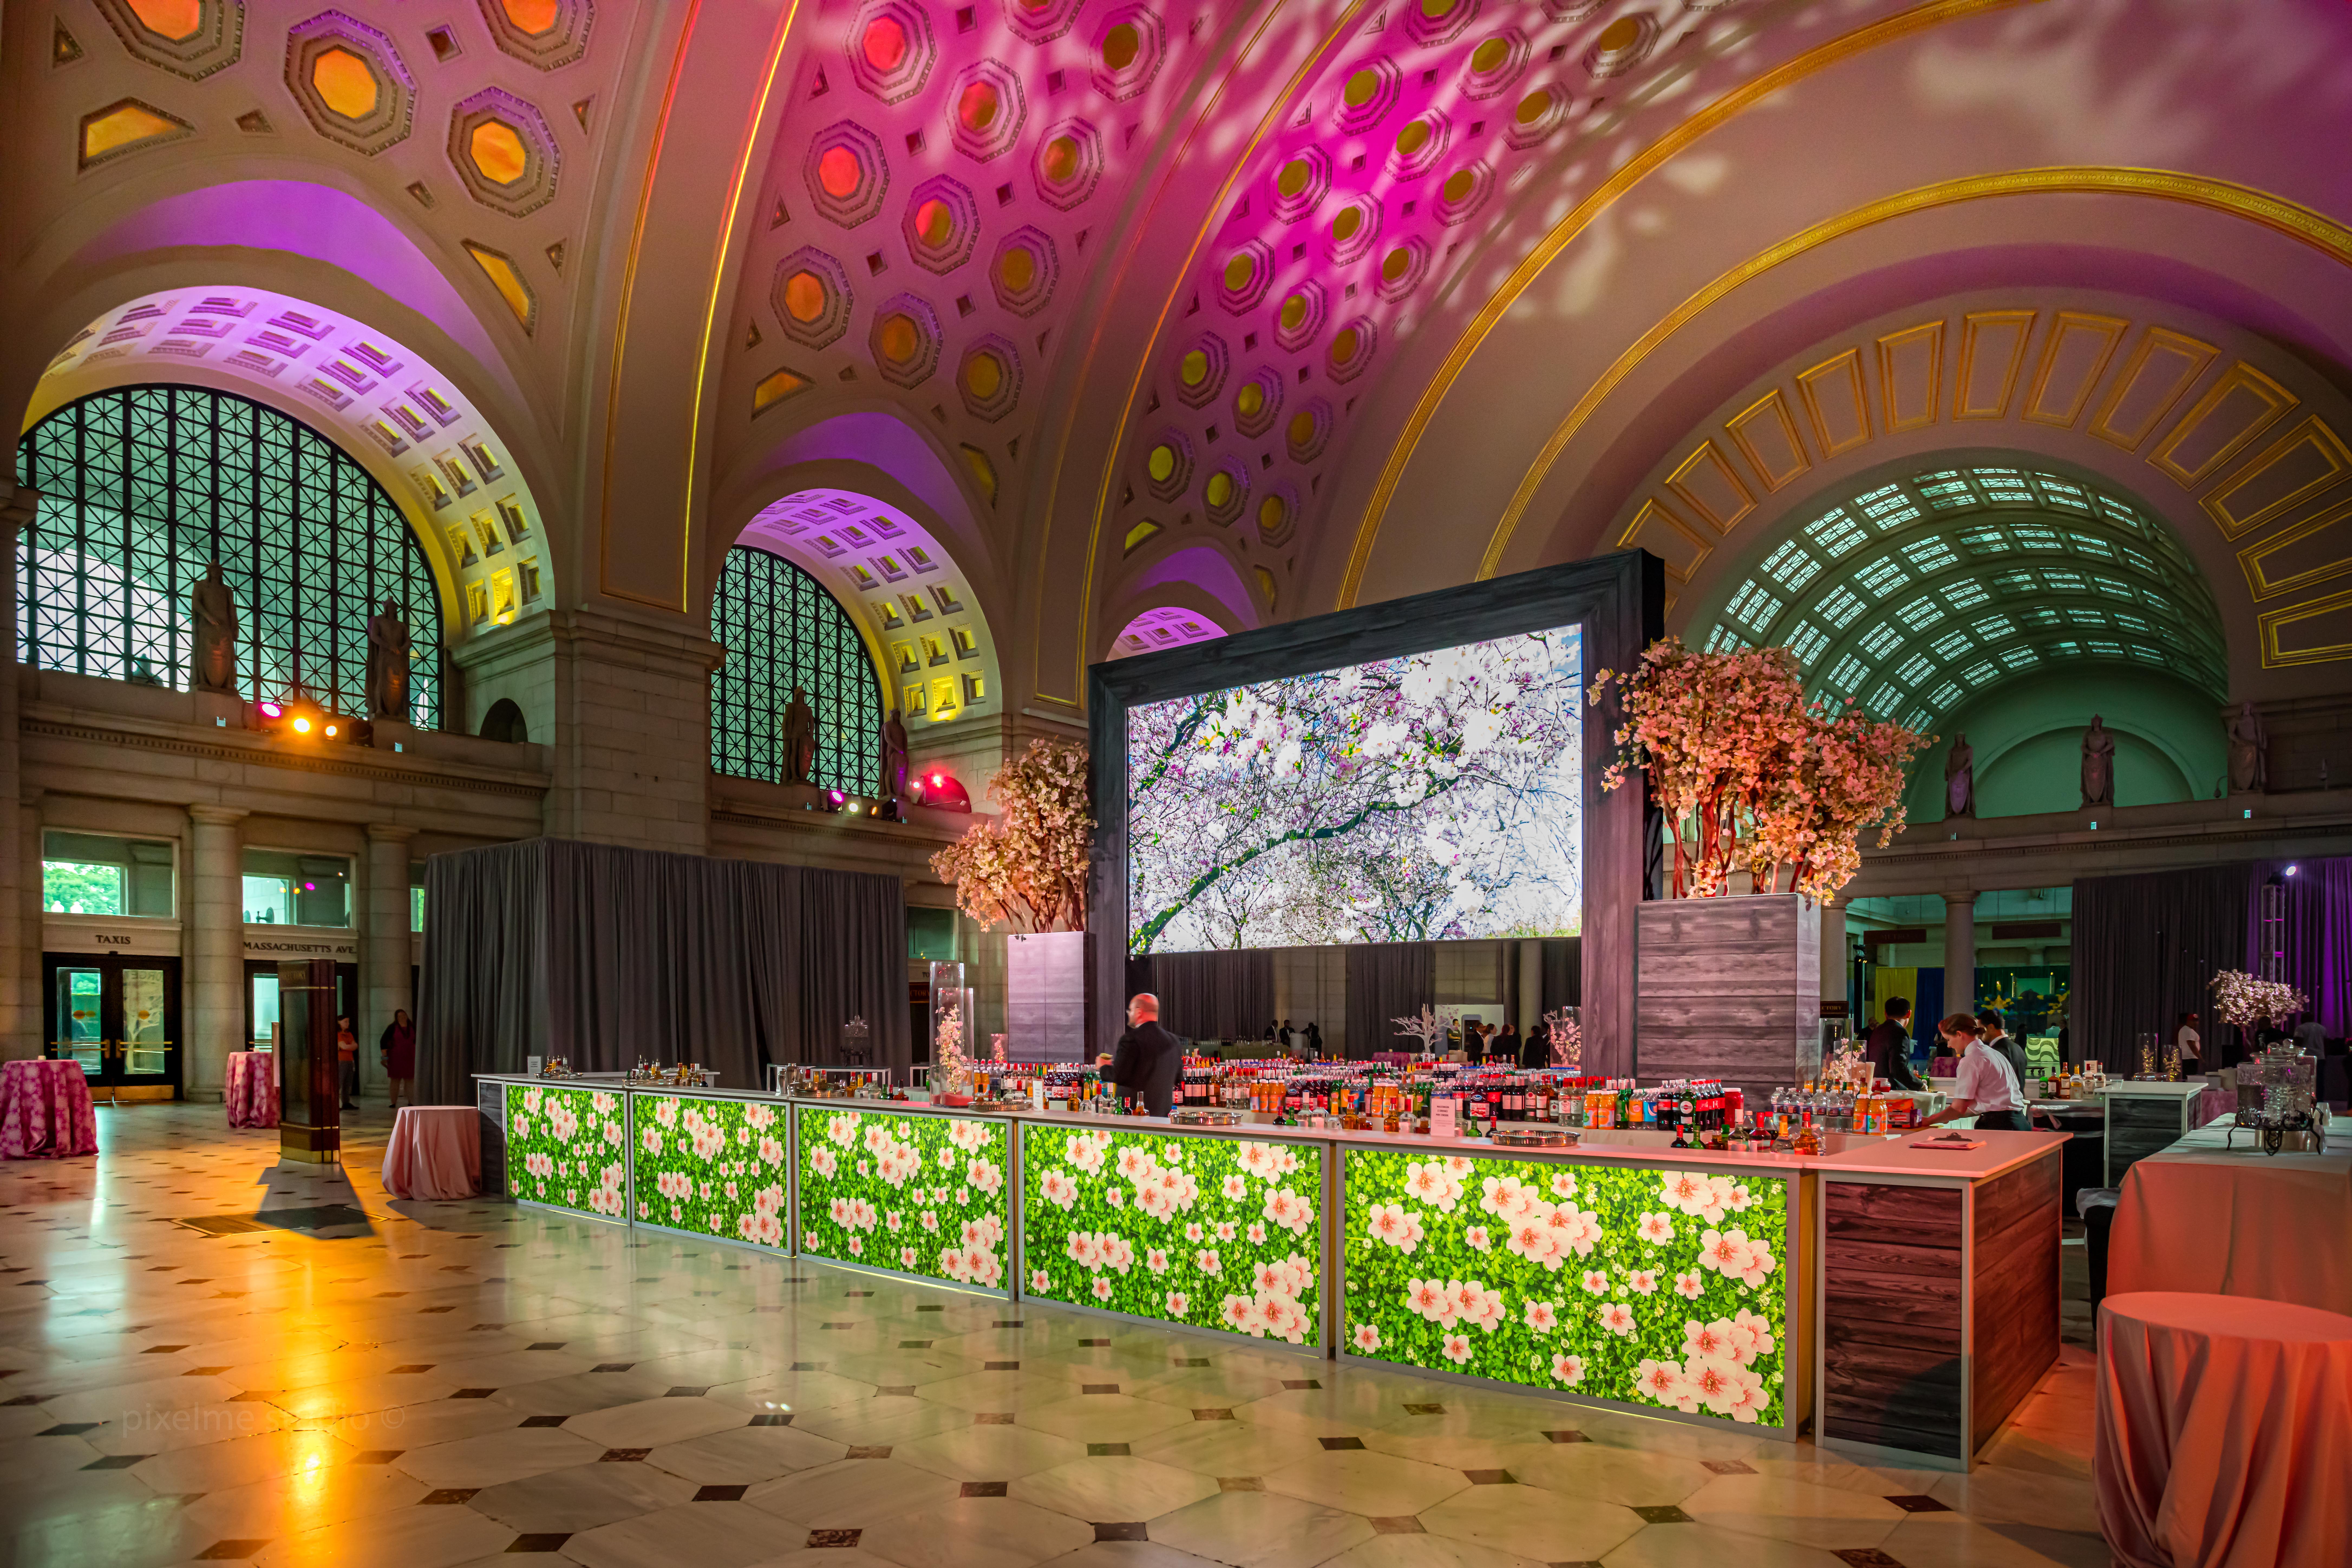 Corporate Event Cocktail Reception in Main Hall featuring a Custom Cherry Blossom Bar, Cherry Blossom Trees, Cocktail Tables, and Pink Up-Lighting.